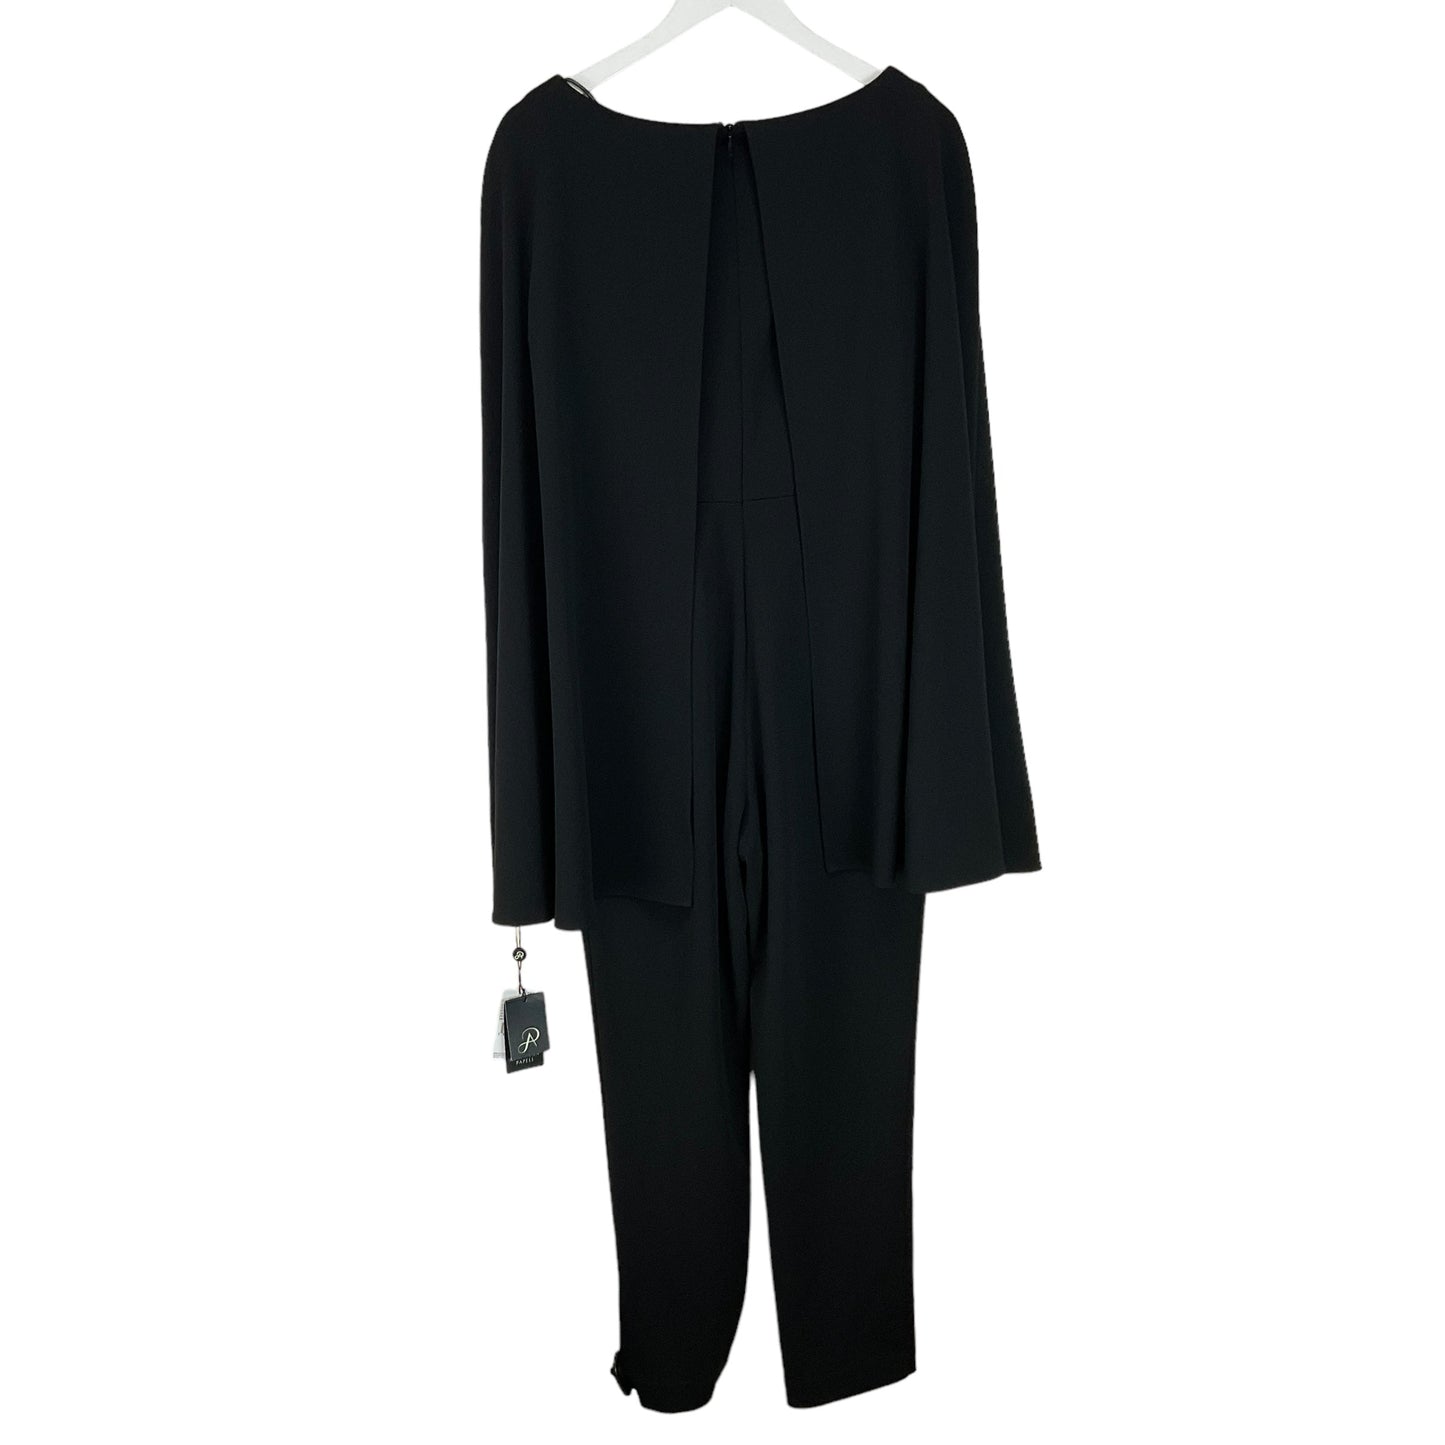 Black Jumpsuit Adrianna Papell, Size 6